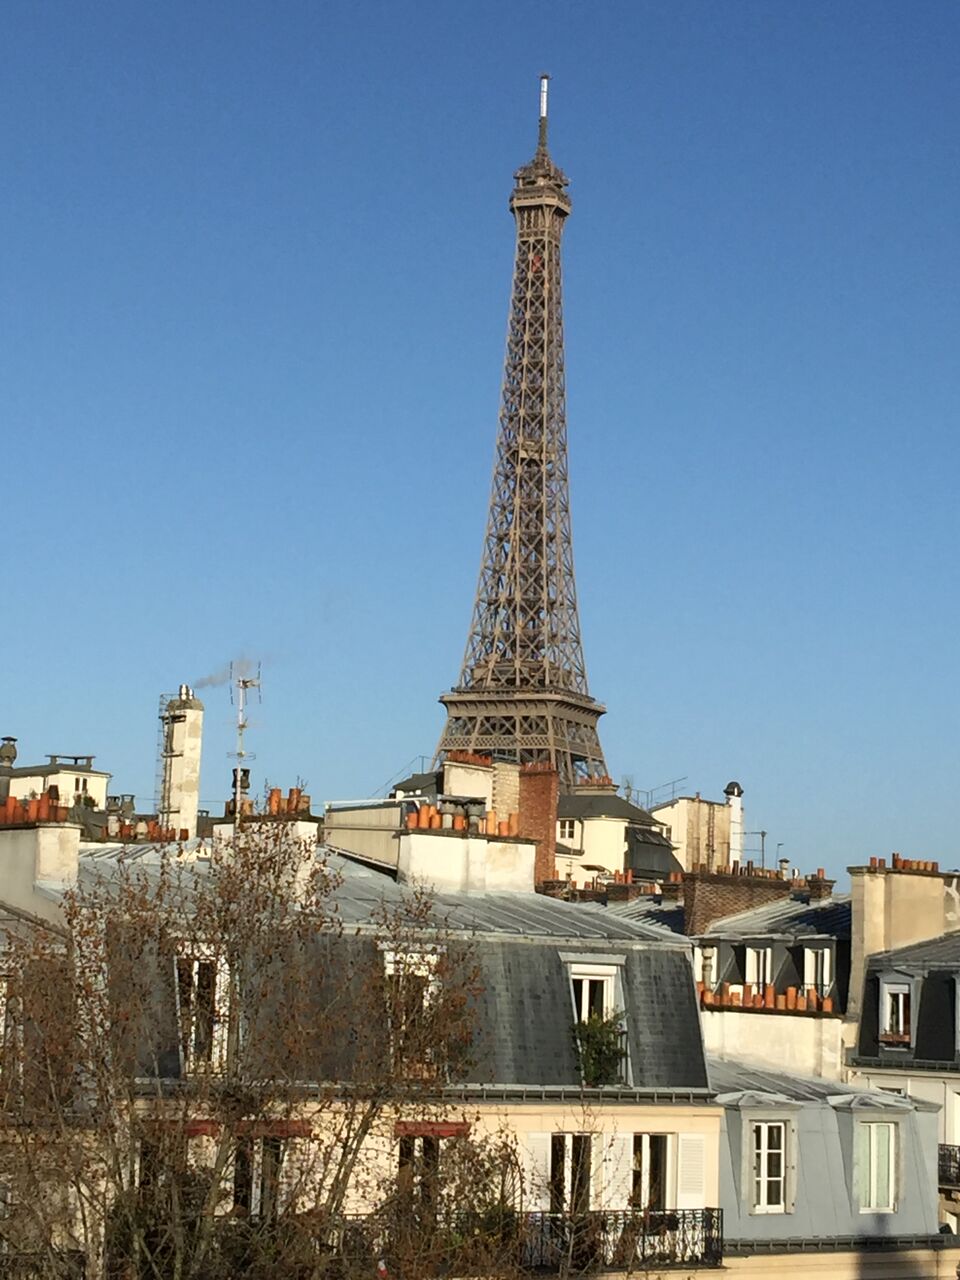 Nothing says Paris like this view.